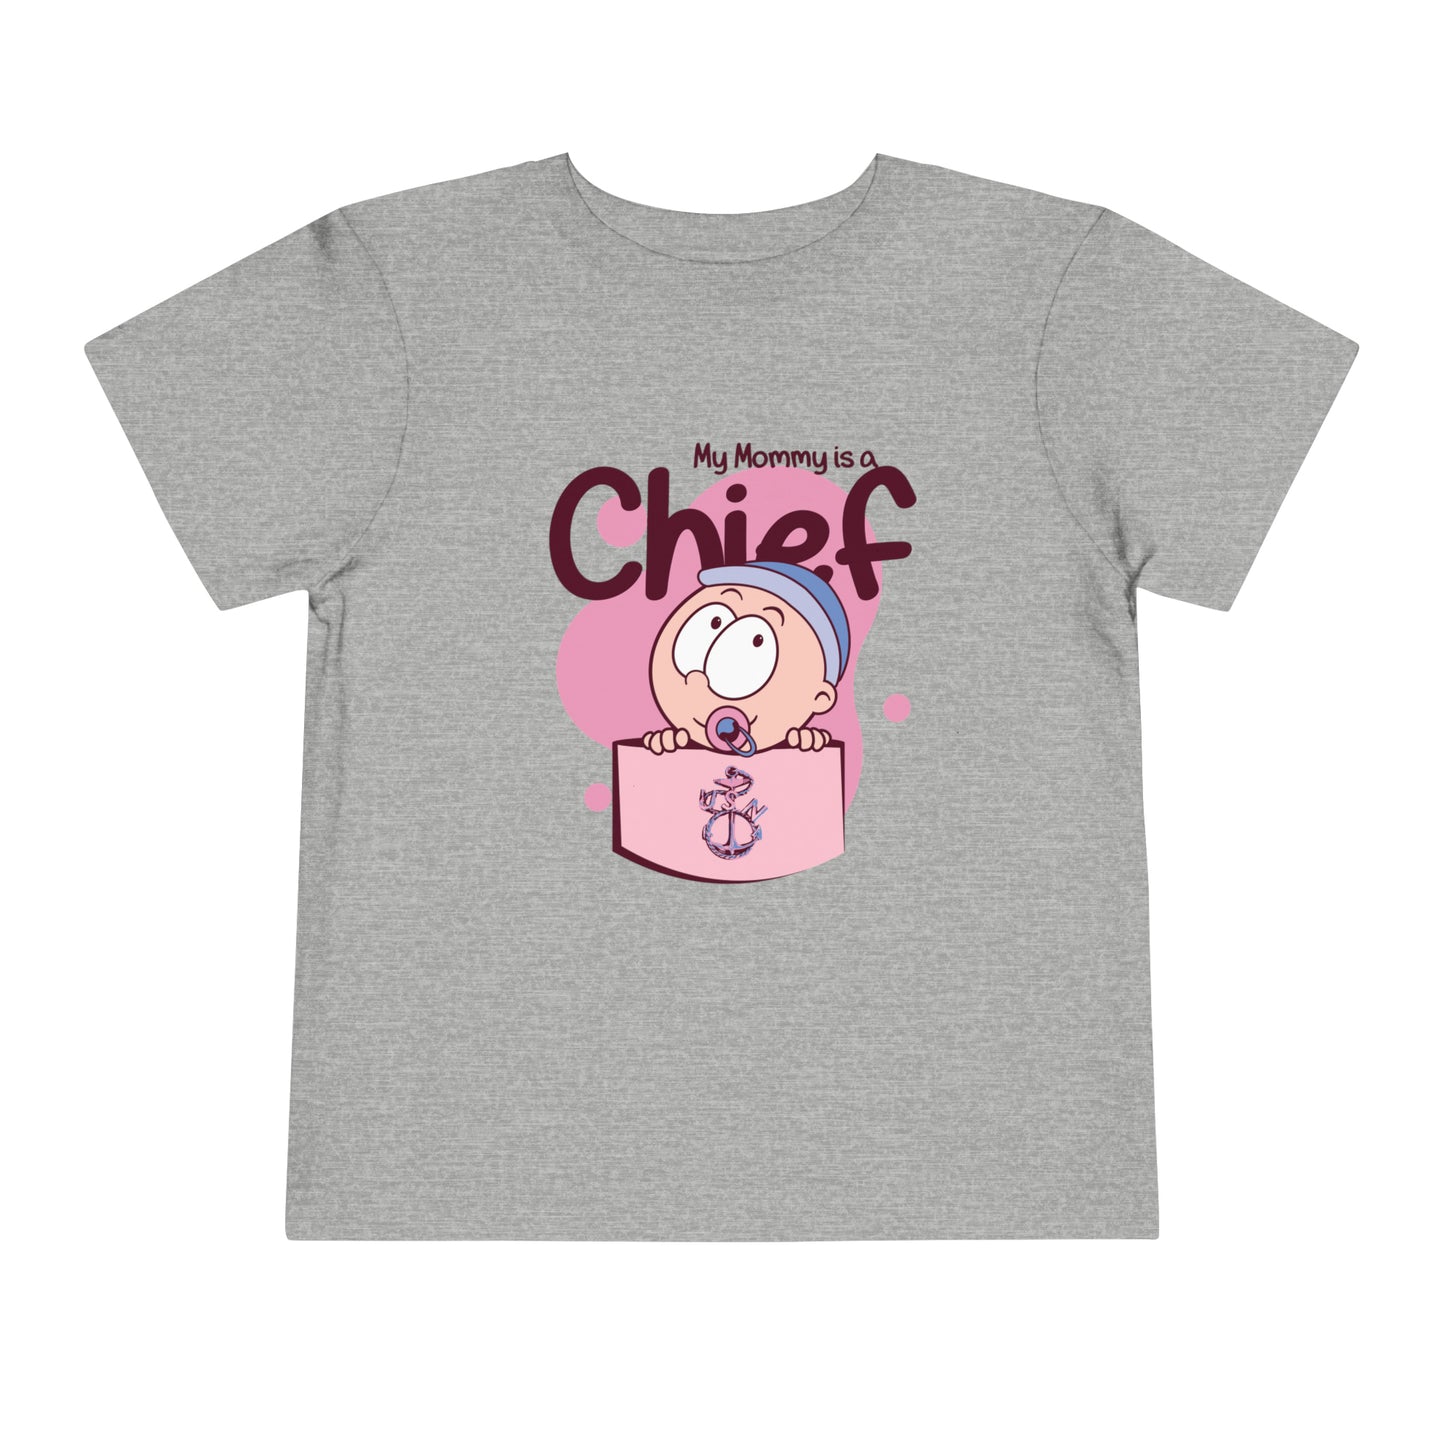 My Mommy is a Chief Toddler Short Sleeve Tee